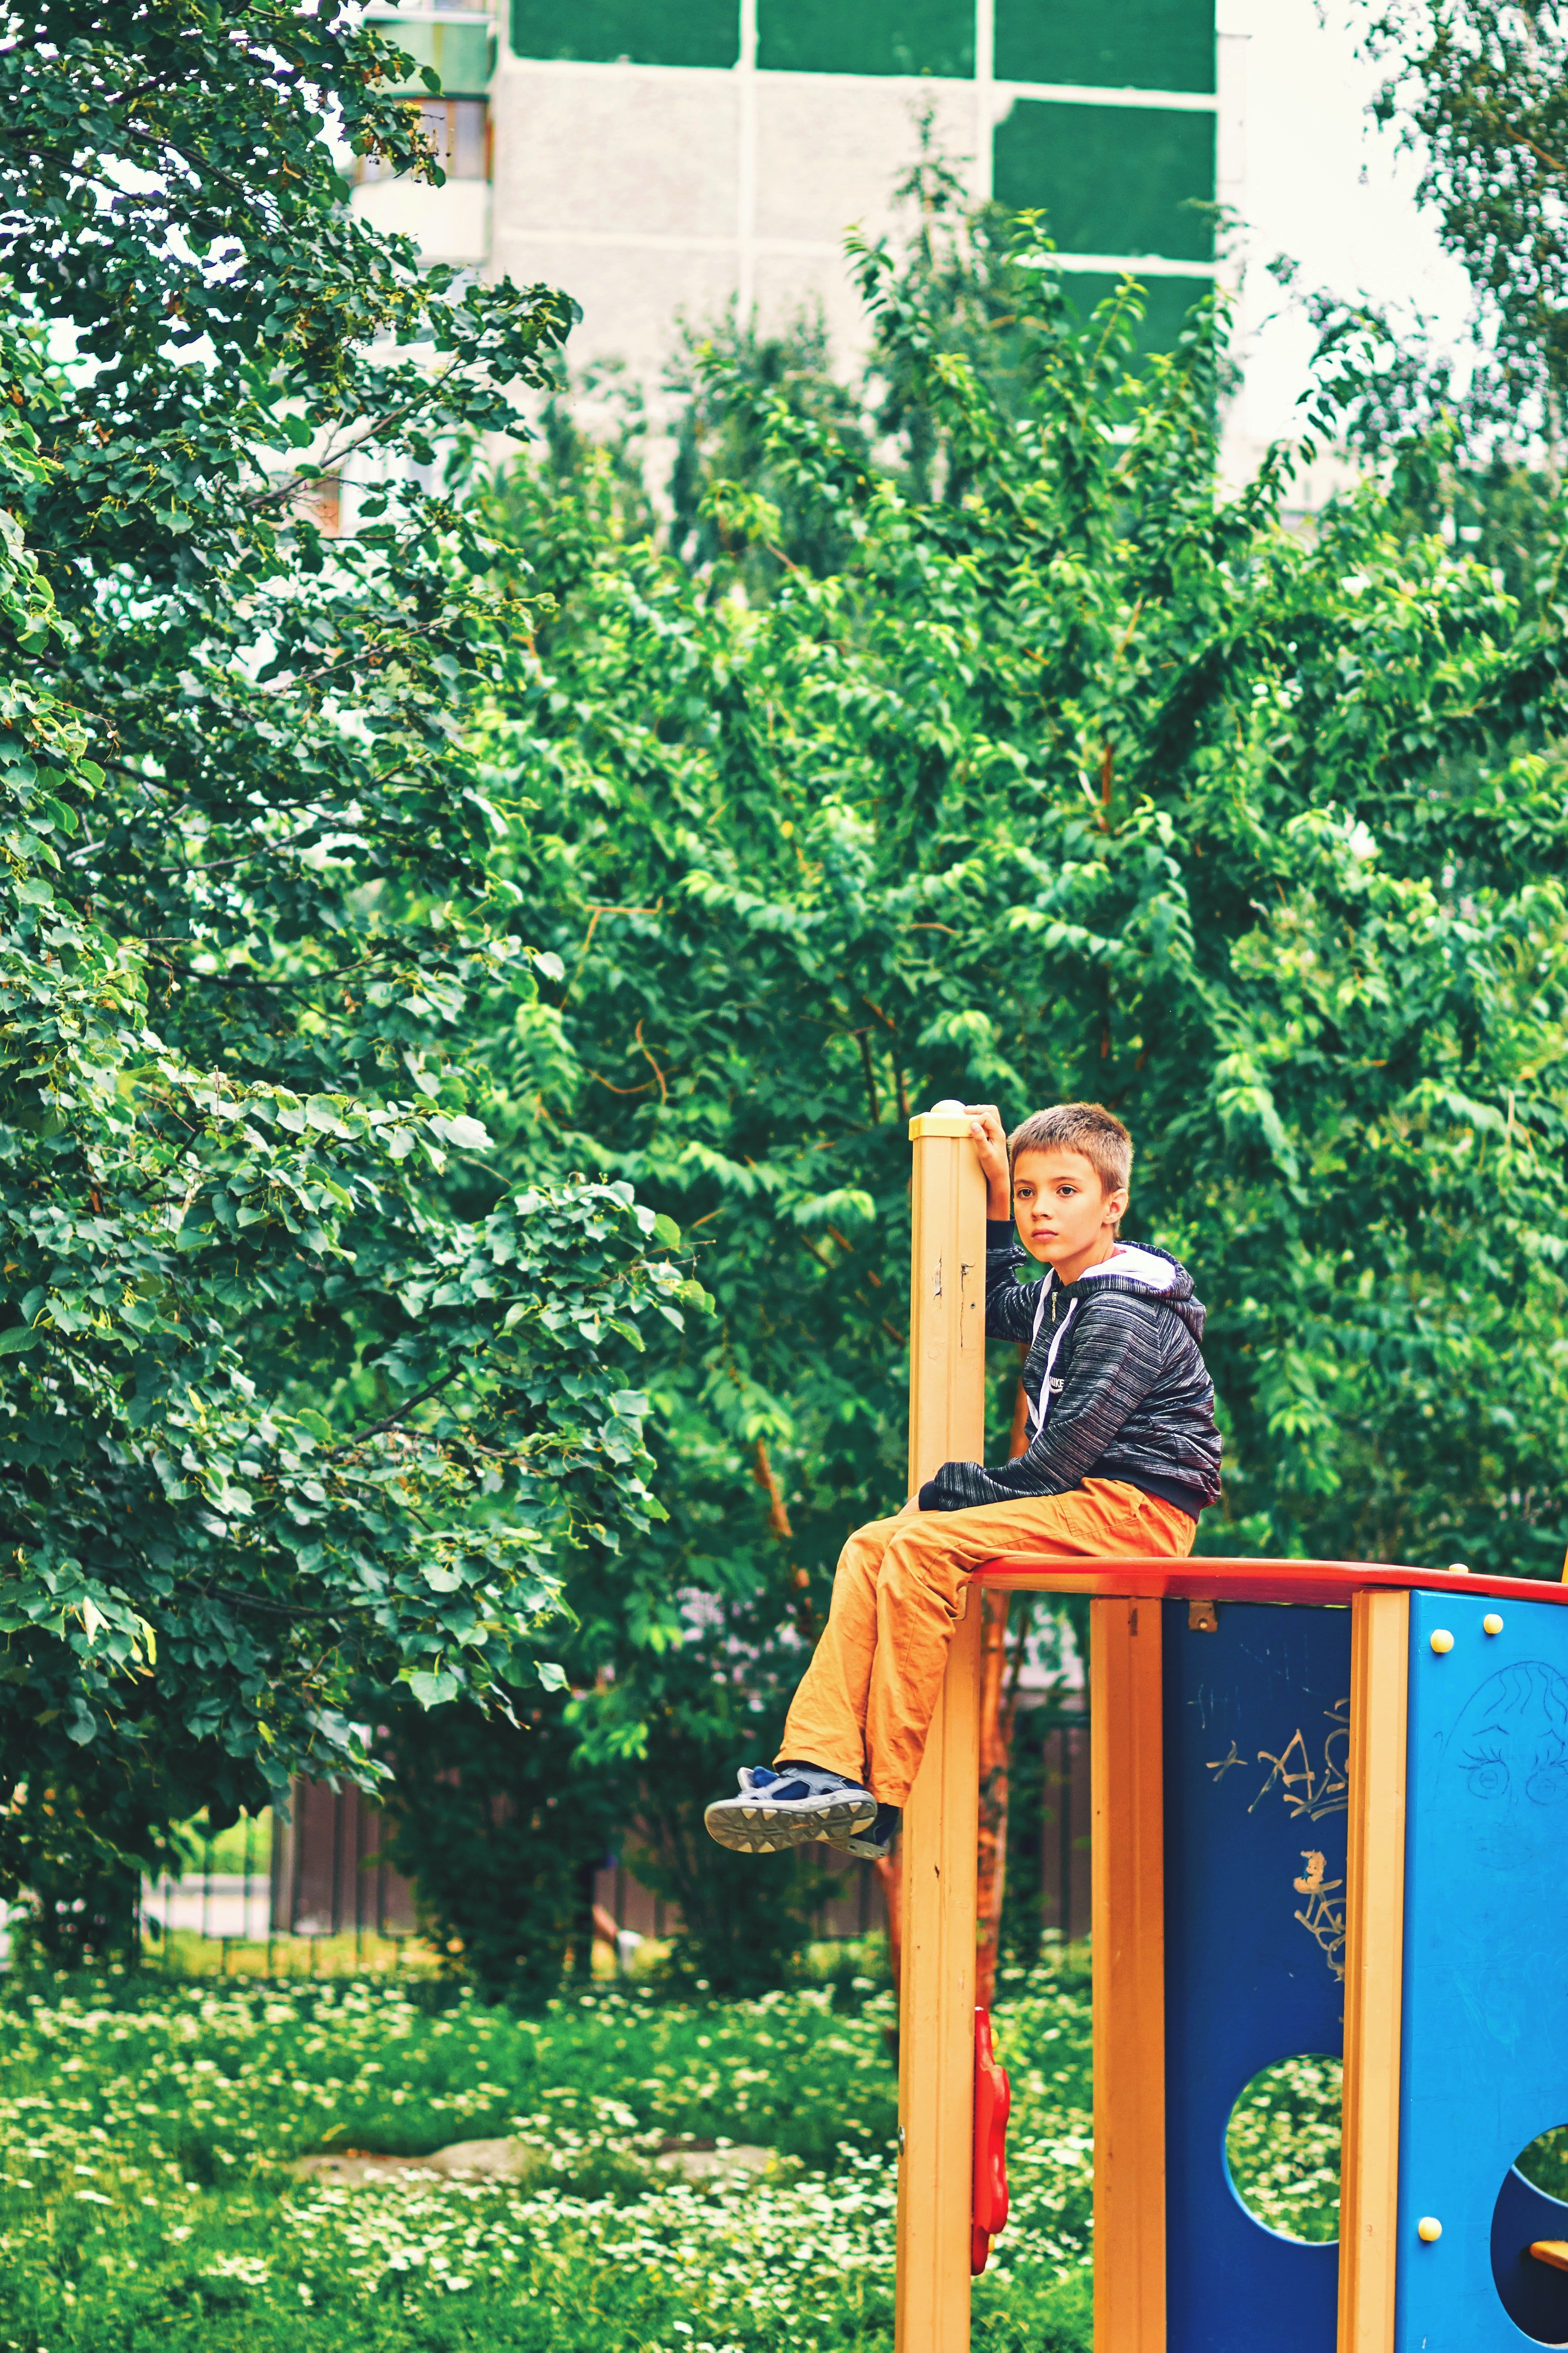 Mrs. Peterson noticed Tom was sitting alone in the playground. | Source: Pexels